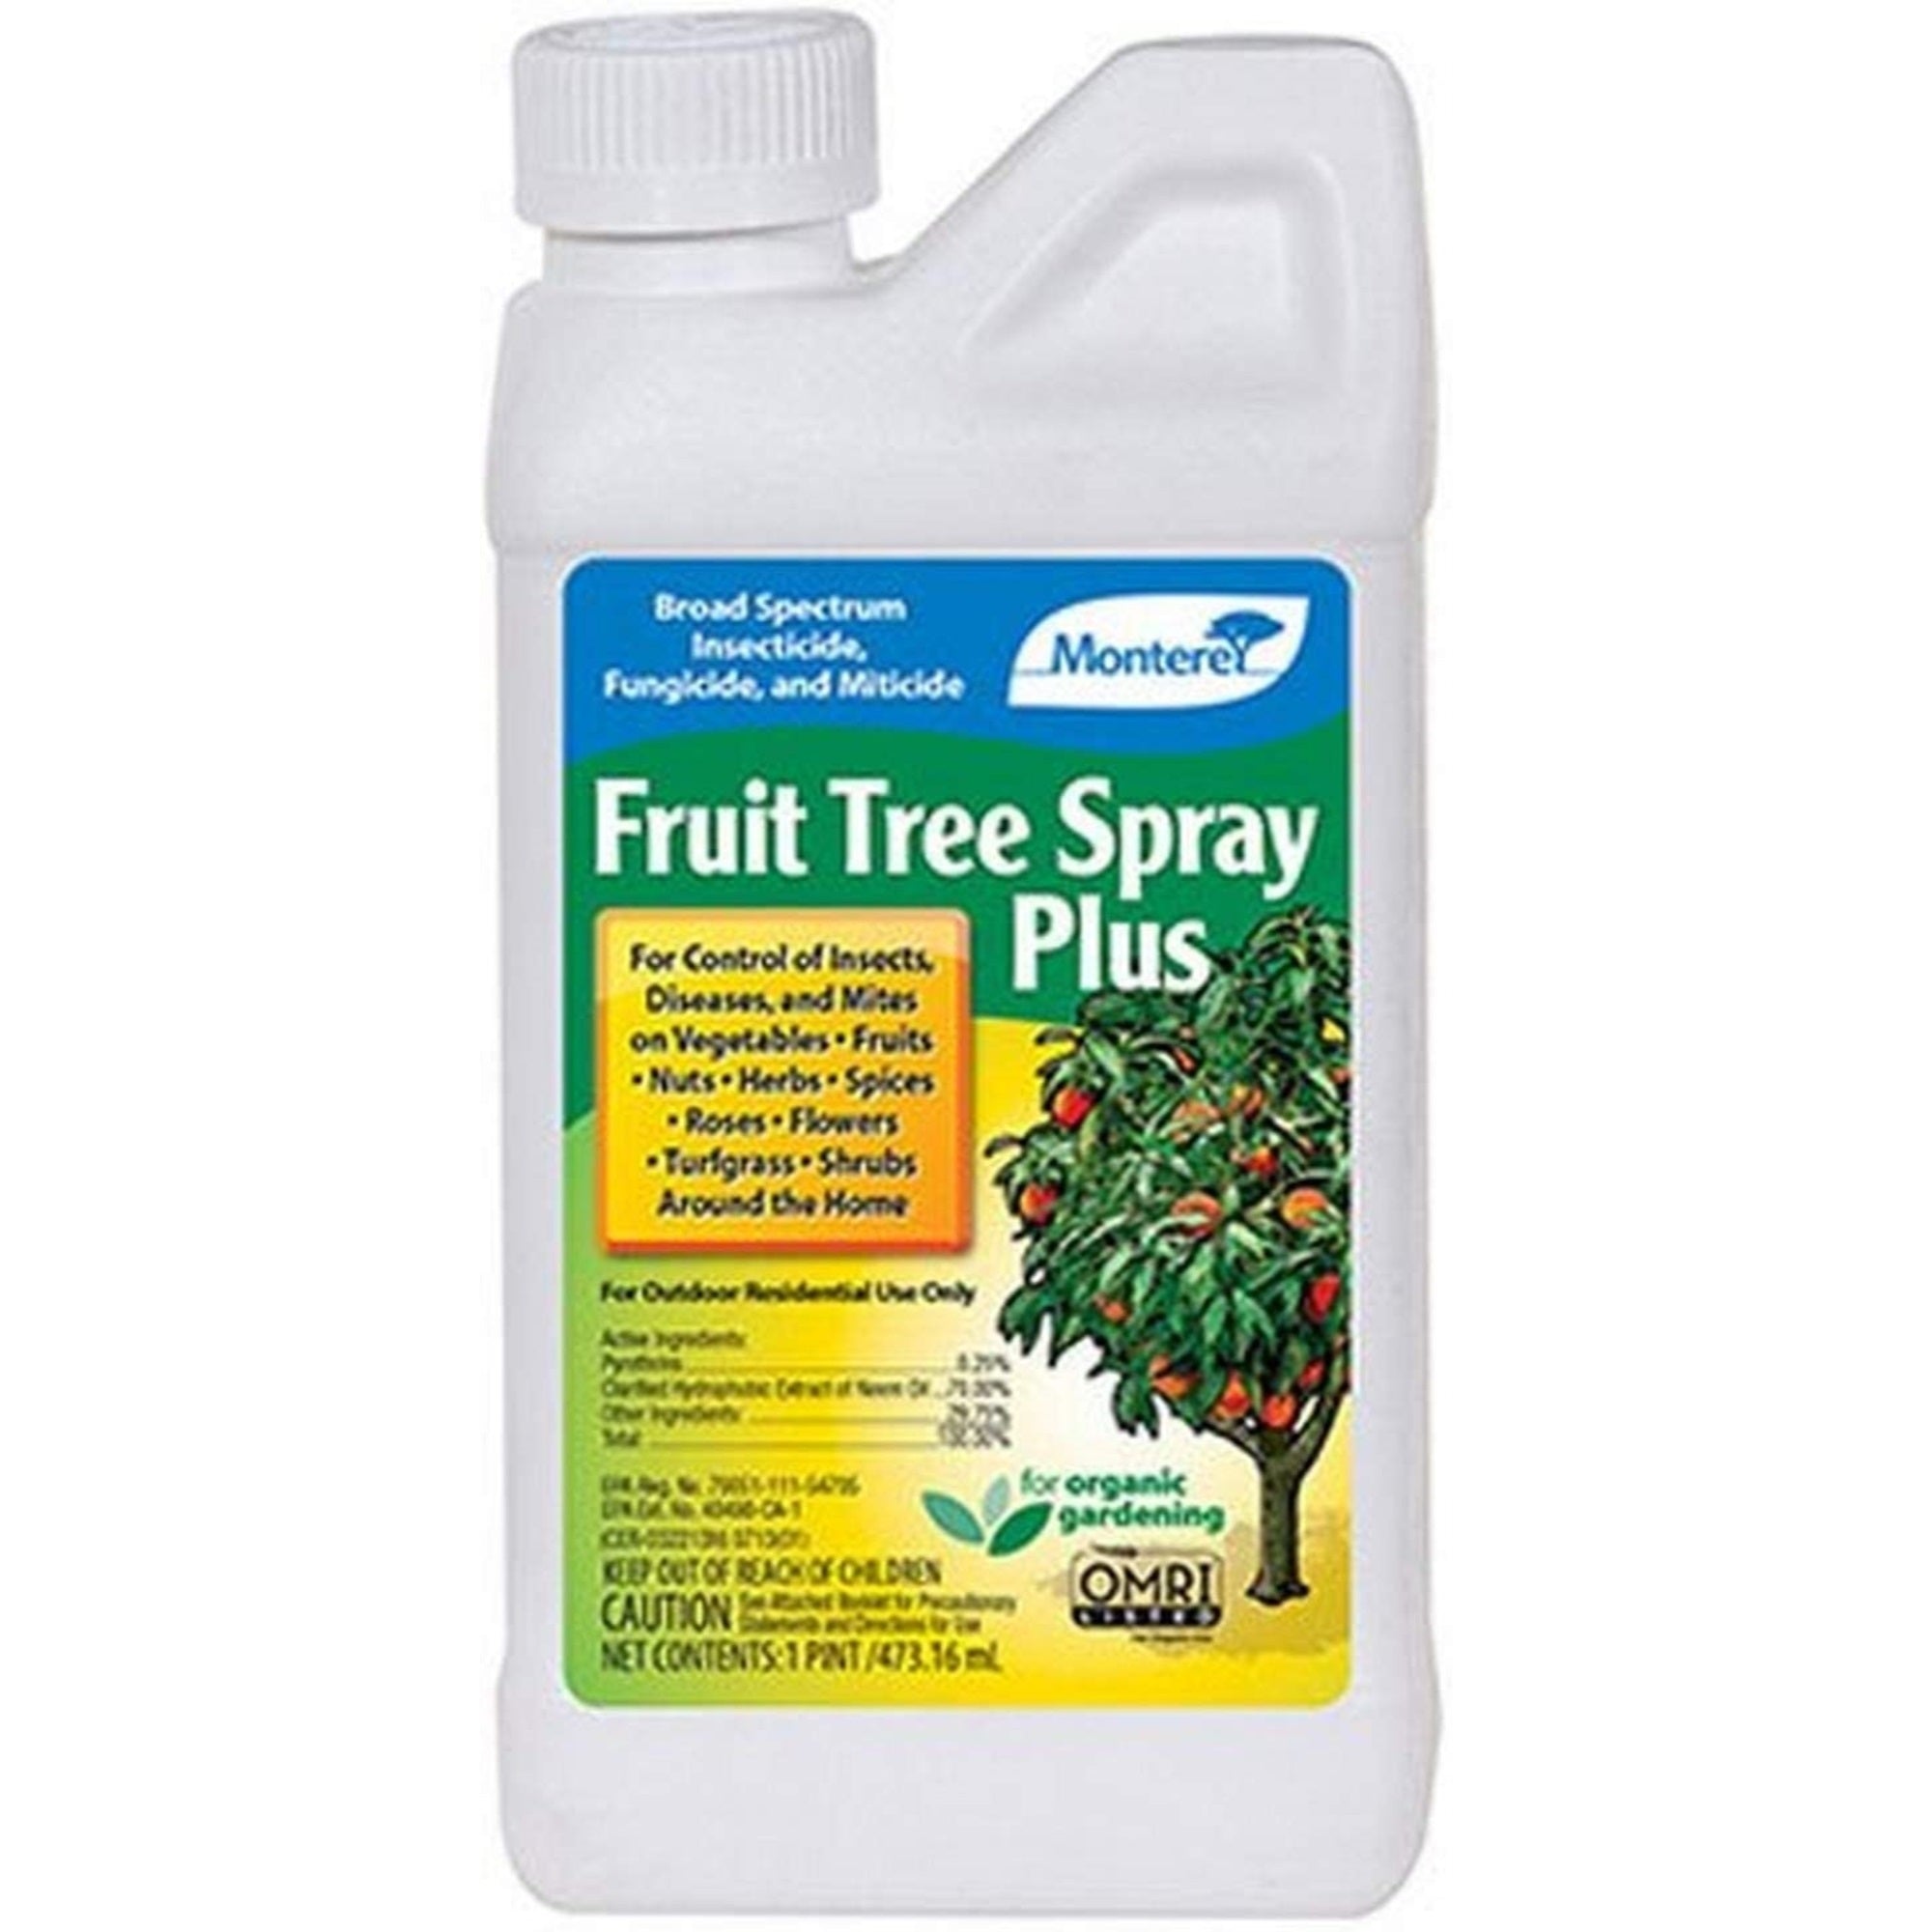 Monterey Organic Fruit Tree Plus for Control of Insects, Diseases & Mites Concentrate, 1 pt